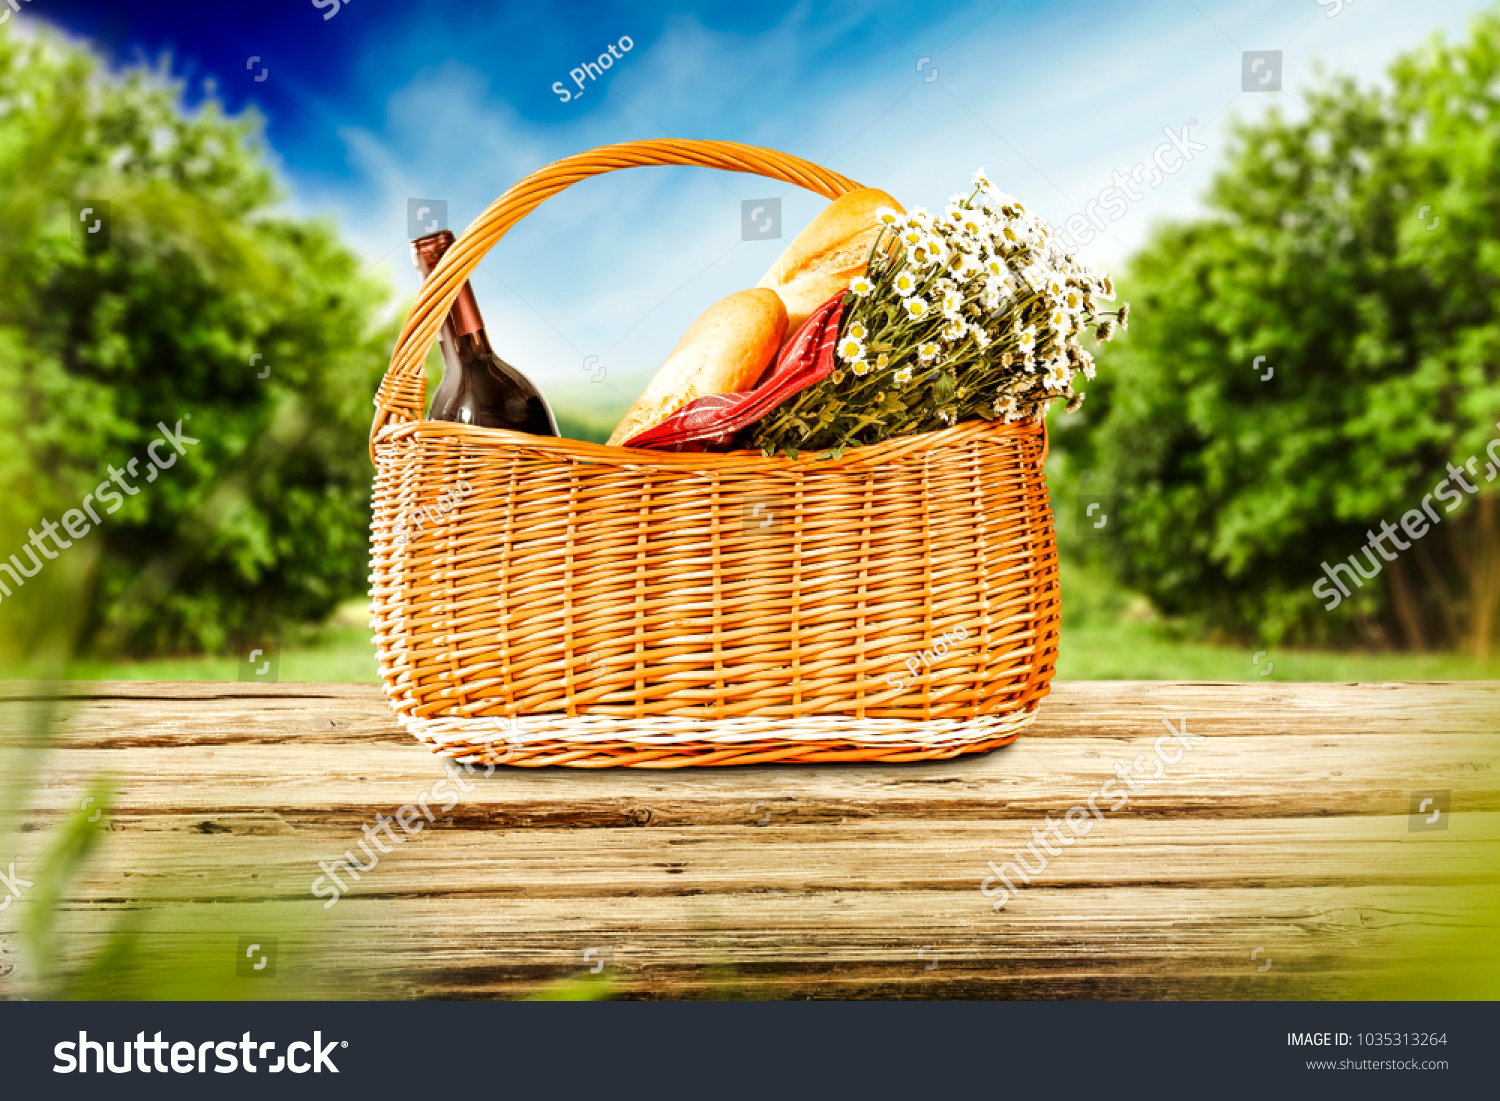 Brown Picnic Basket Food On Wooden Stock Photo Edit Now 1035313264